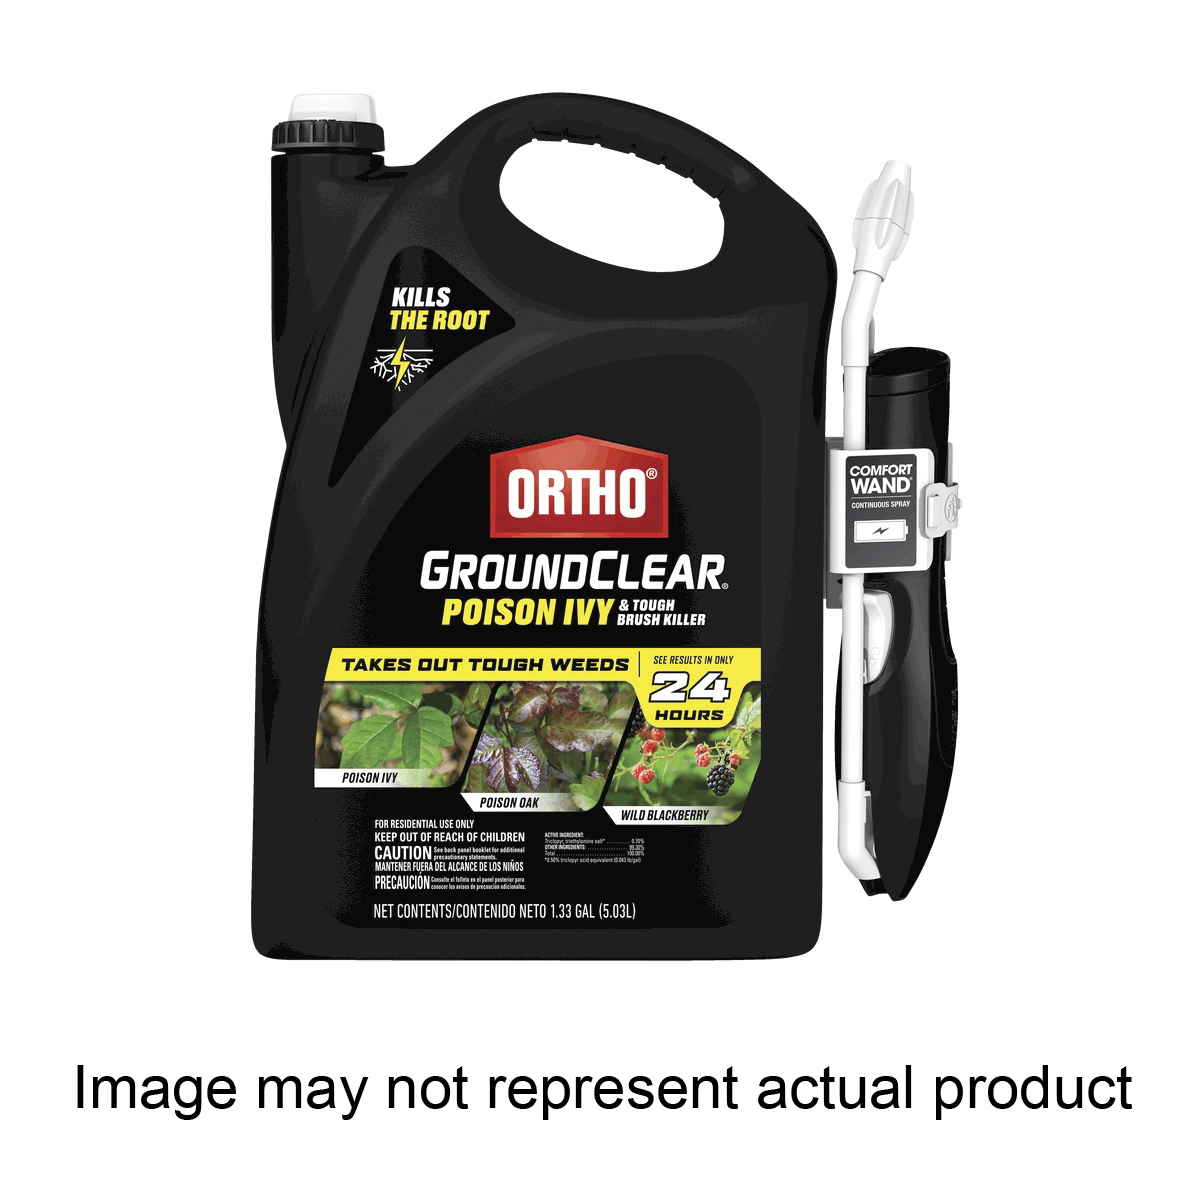 GroundClear 0476410 Poison Ivy and Tough Brush Killer, Liquid, Amber to Dark Brown, 1 gal Bottle